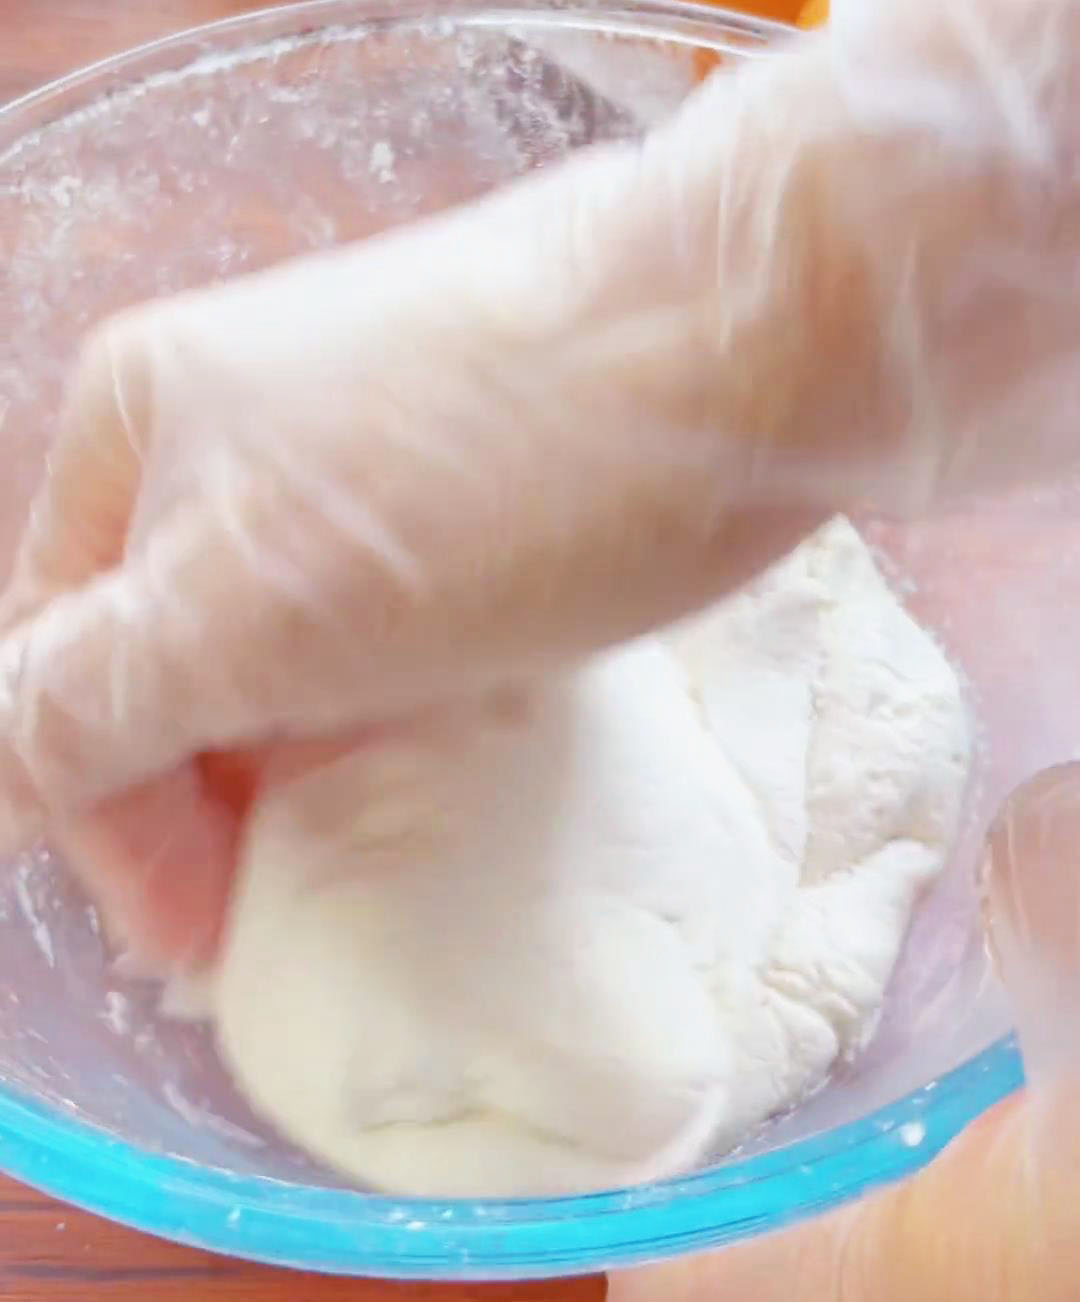 Continue stirring and kneading until a smooth and non sticky dough forms